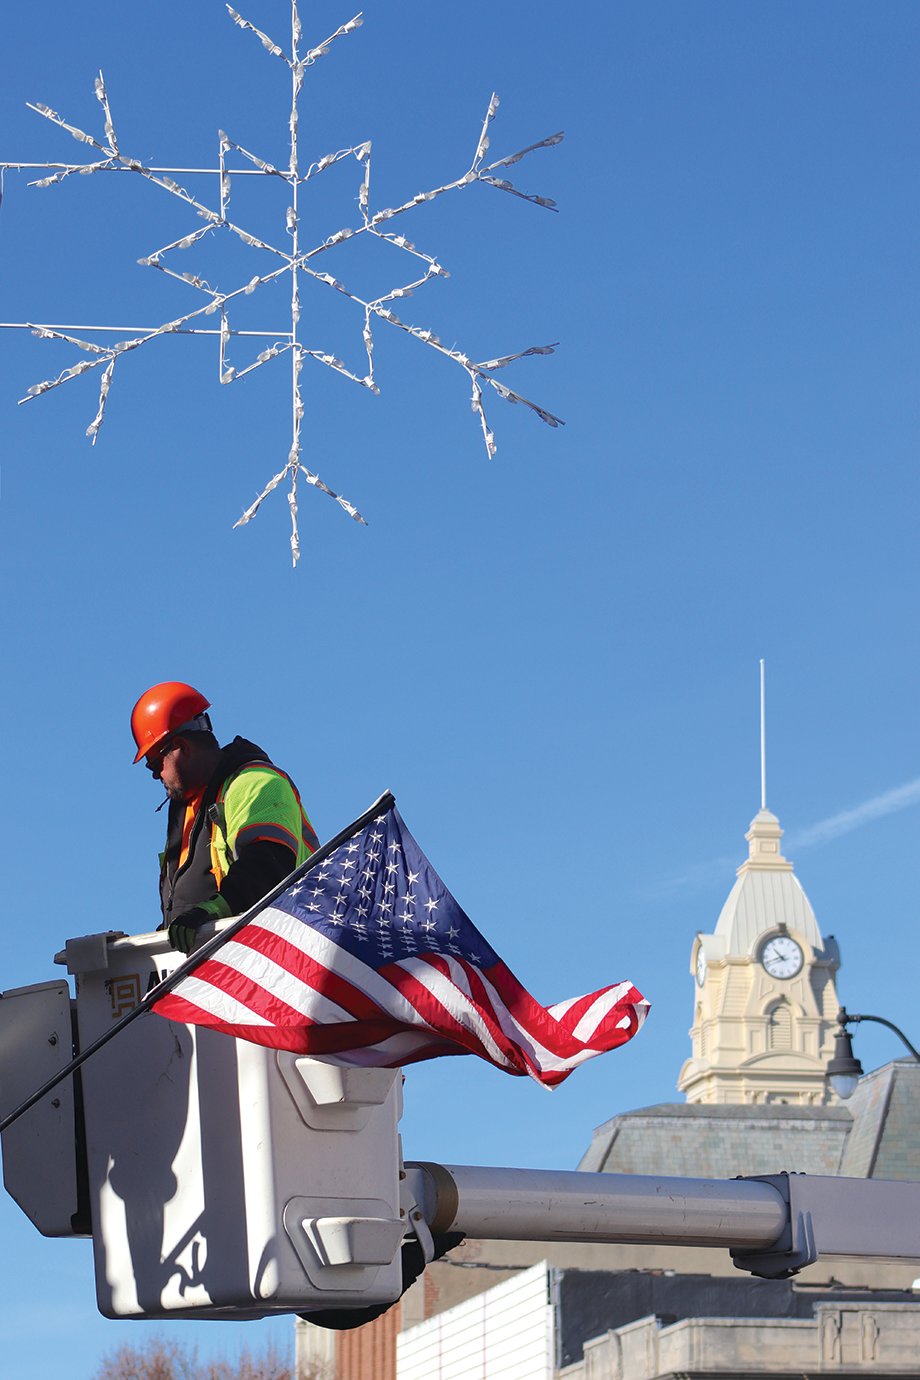 As Thanksgiving and Christmas near, city employees such as Tom Edwards of the Street Department work to ring in the holiday spirit throughout Crawfordsville.